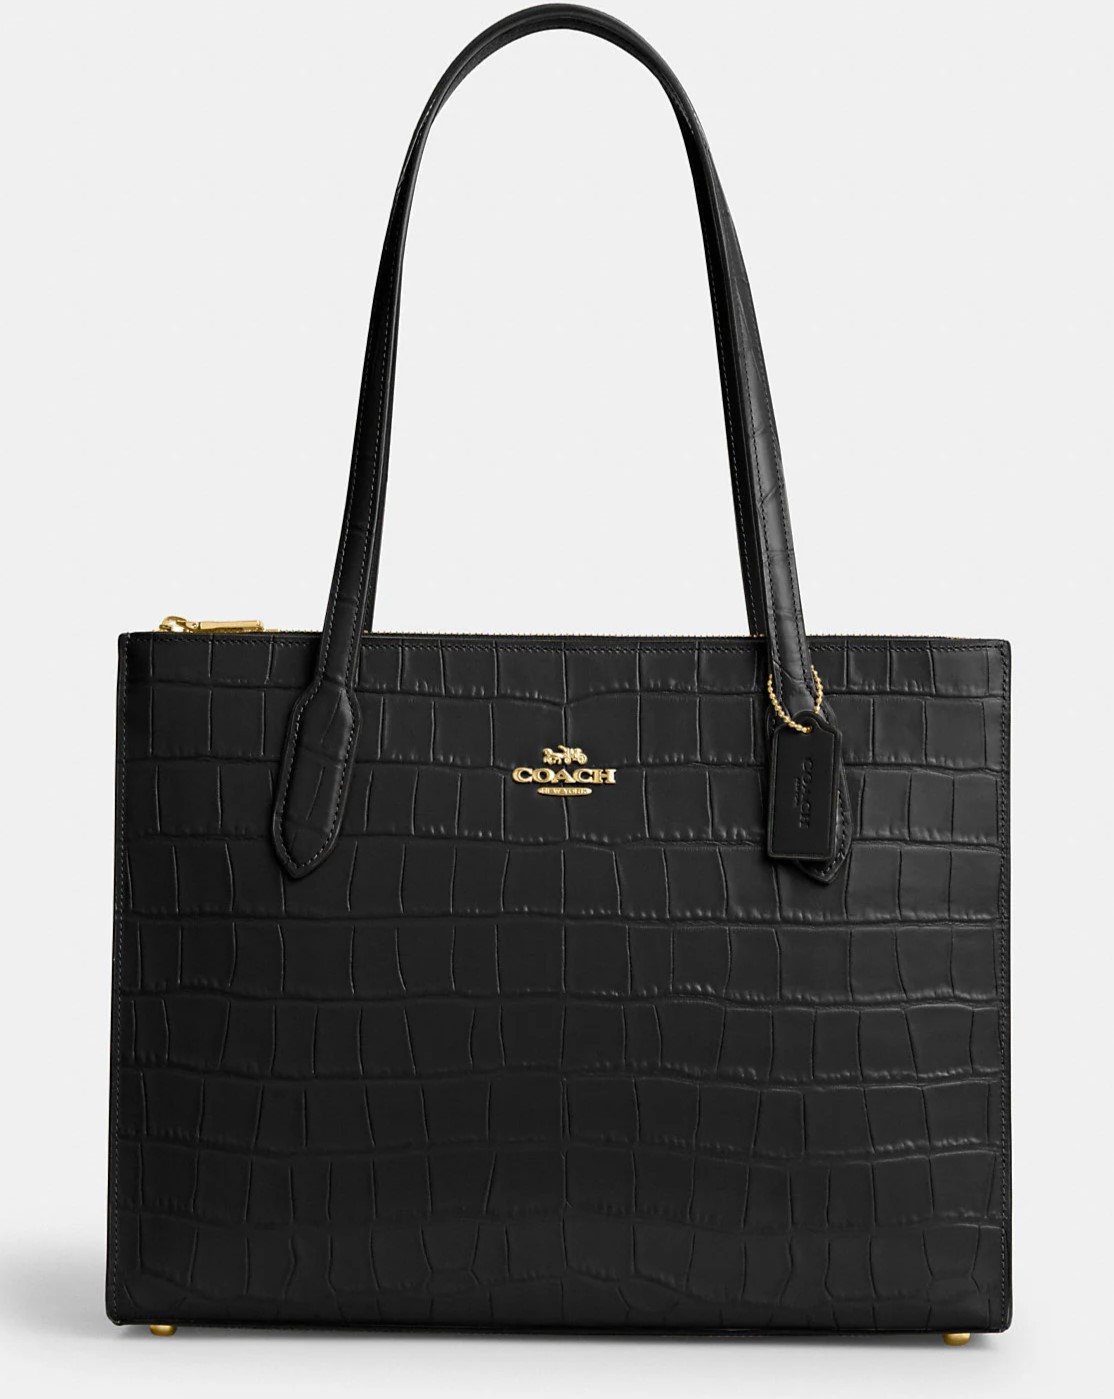 TÚI XÁCH COACH NỮ NINA TOTE CROCODILE-EMBOSSED LEATHER AND SMOOTH LEATHER BAG IN GOLD BLACK CL654 9